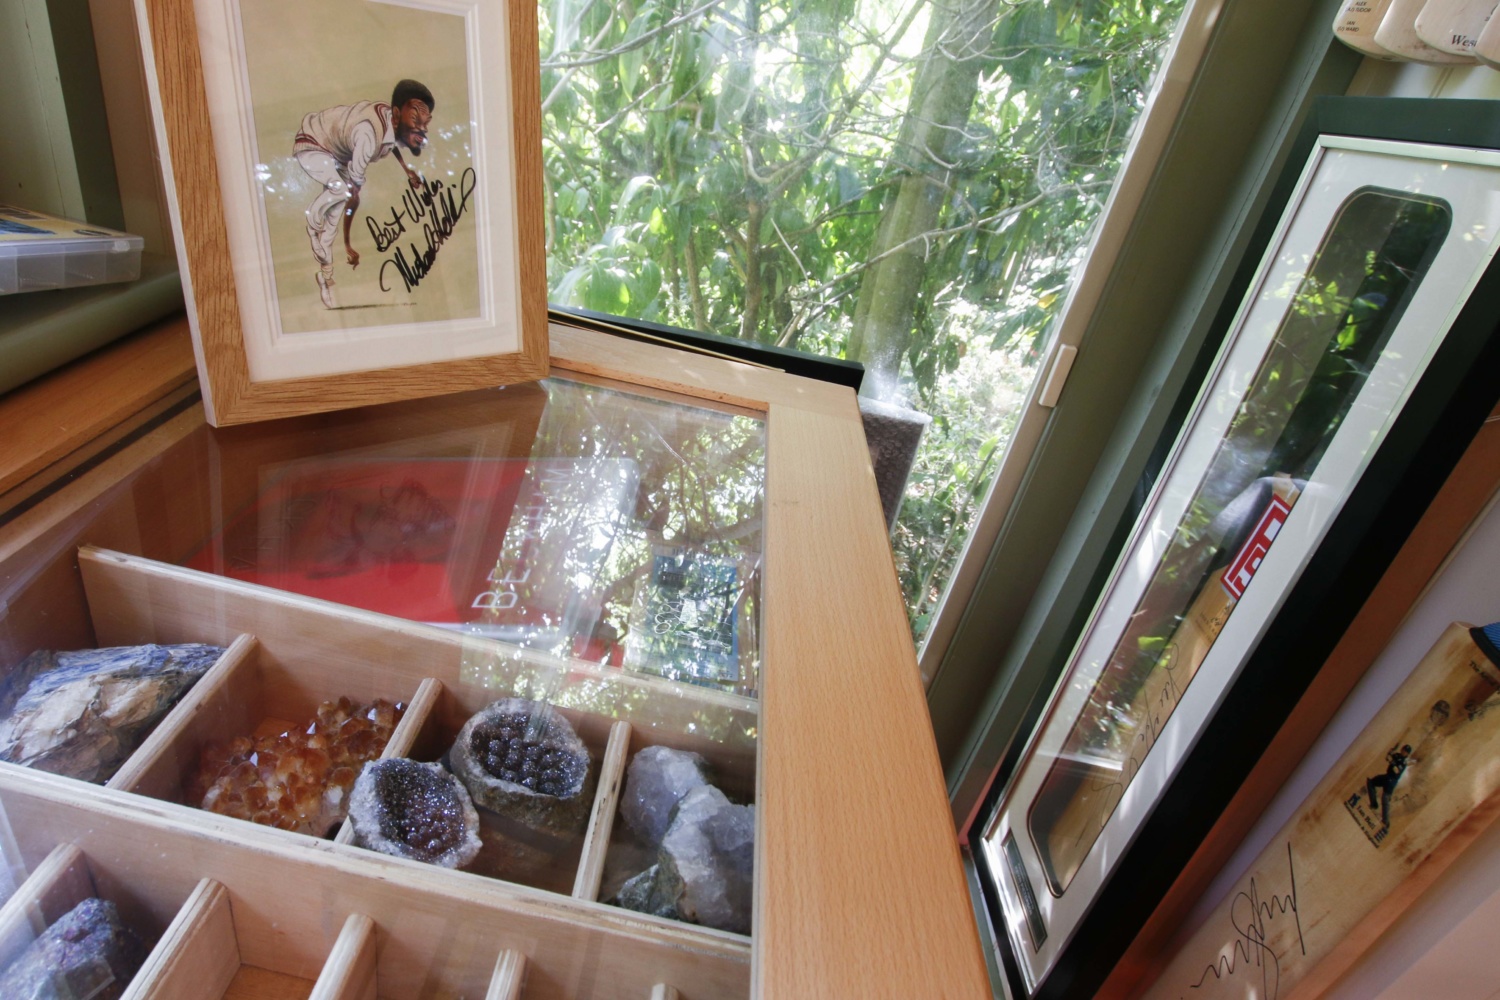 We visit a customer who uses their garden studio to house his vast collection of sports memorabilia